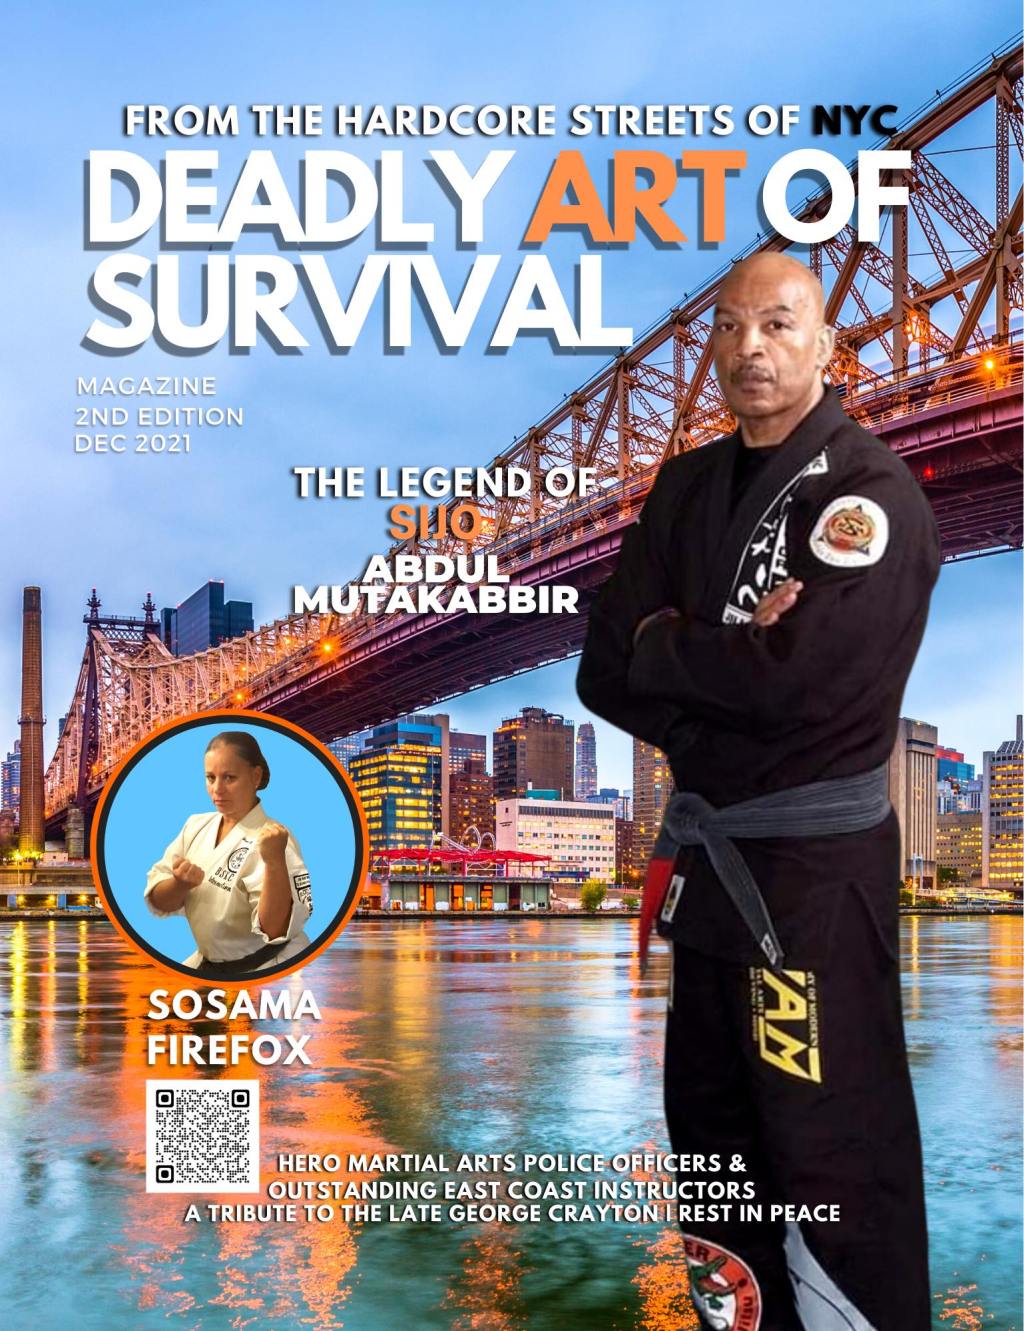 The Deadly Art of Survival Magazine